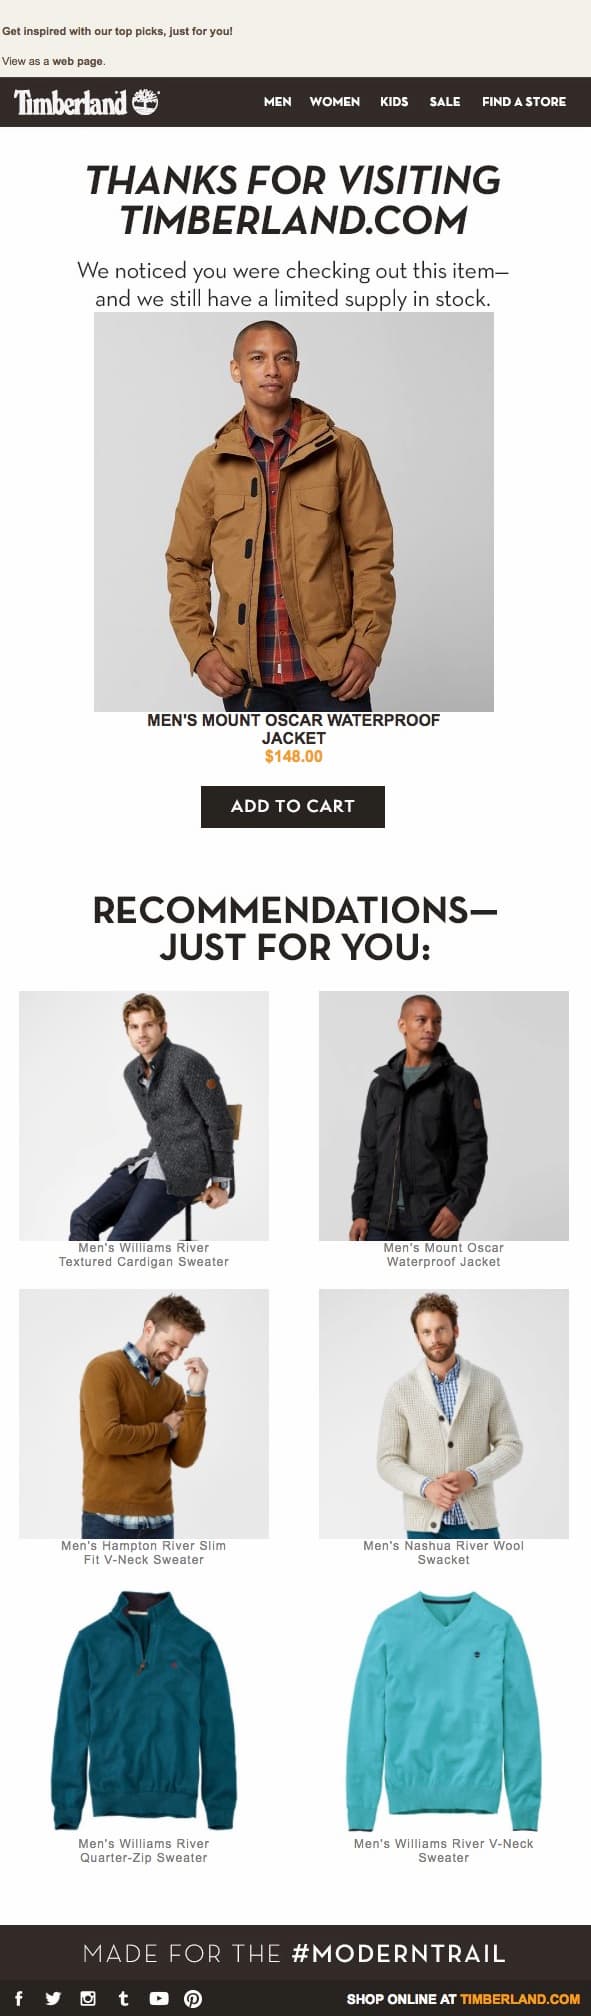 browse-abandonment-email-from-timberland